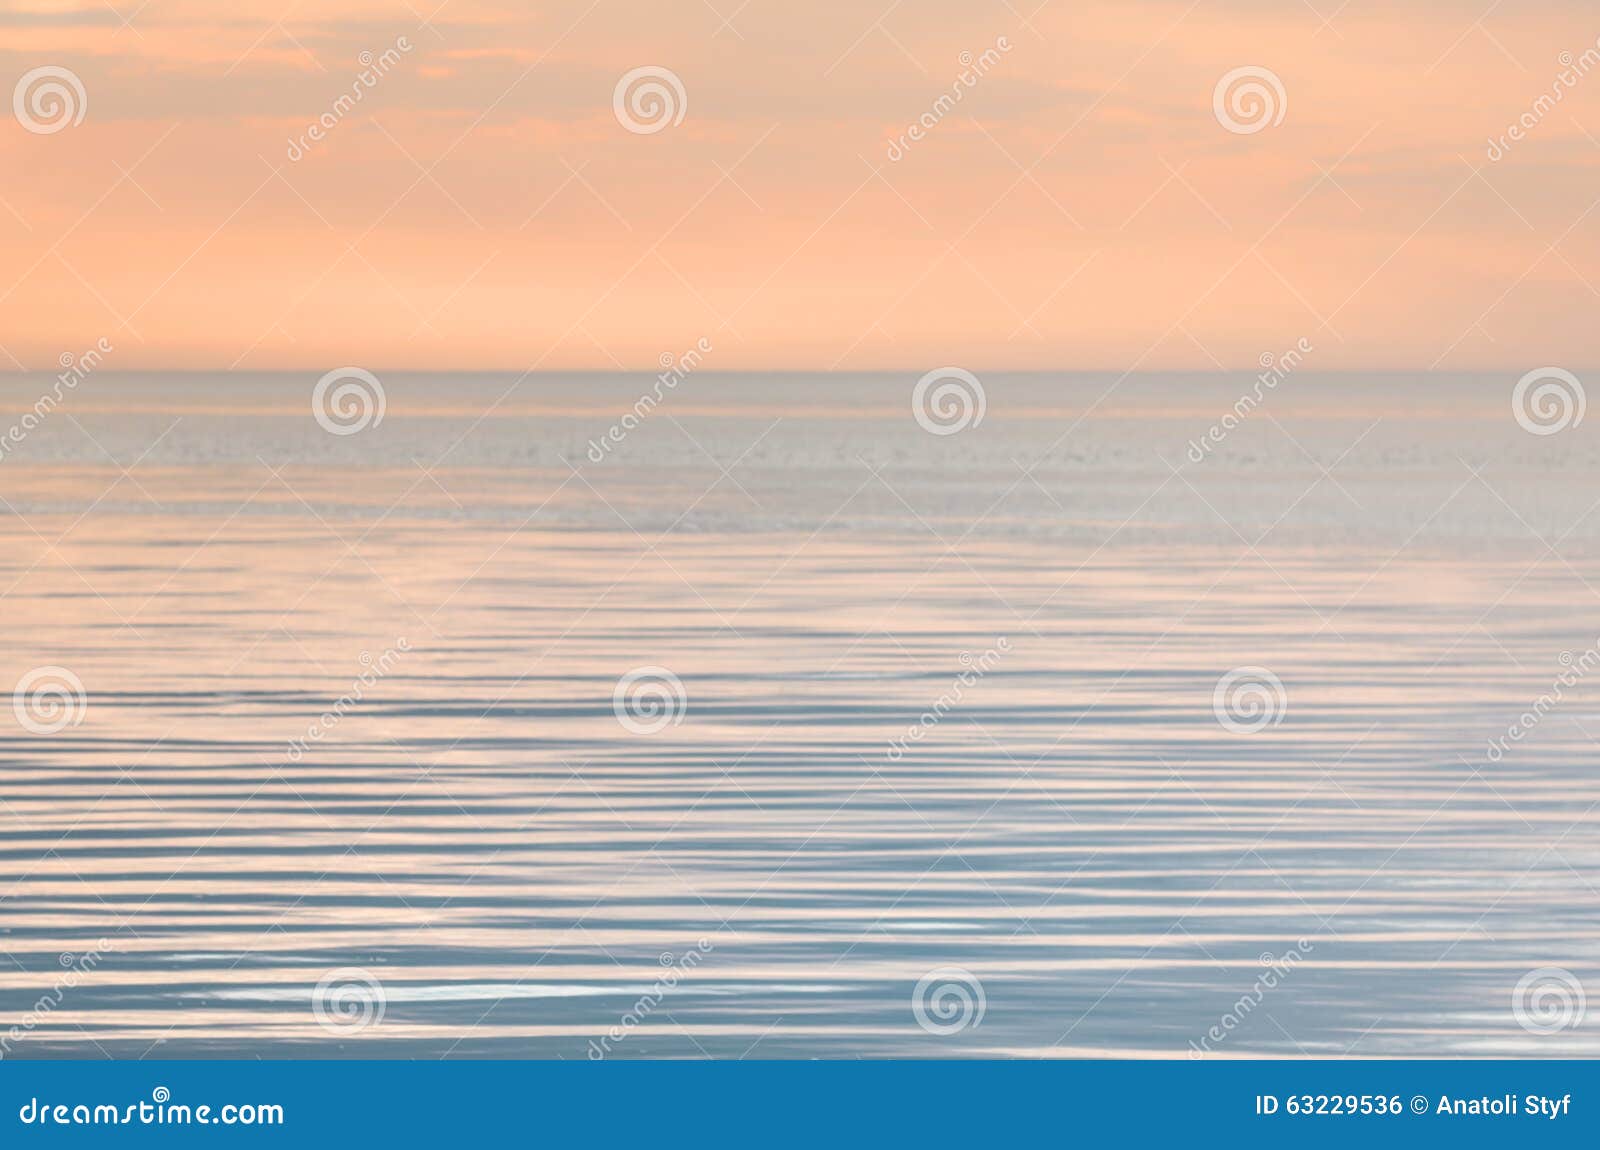 tranquility on the sea